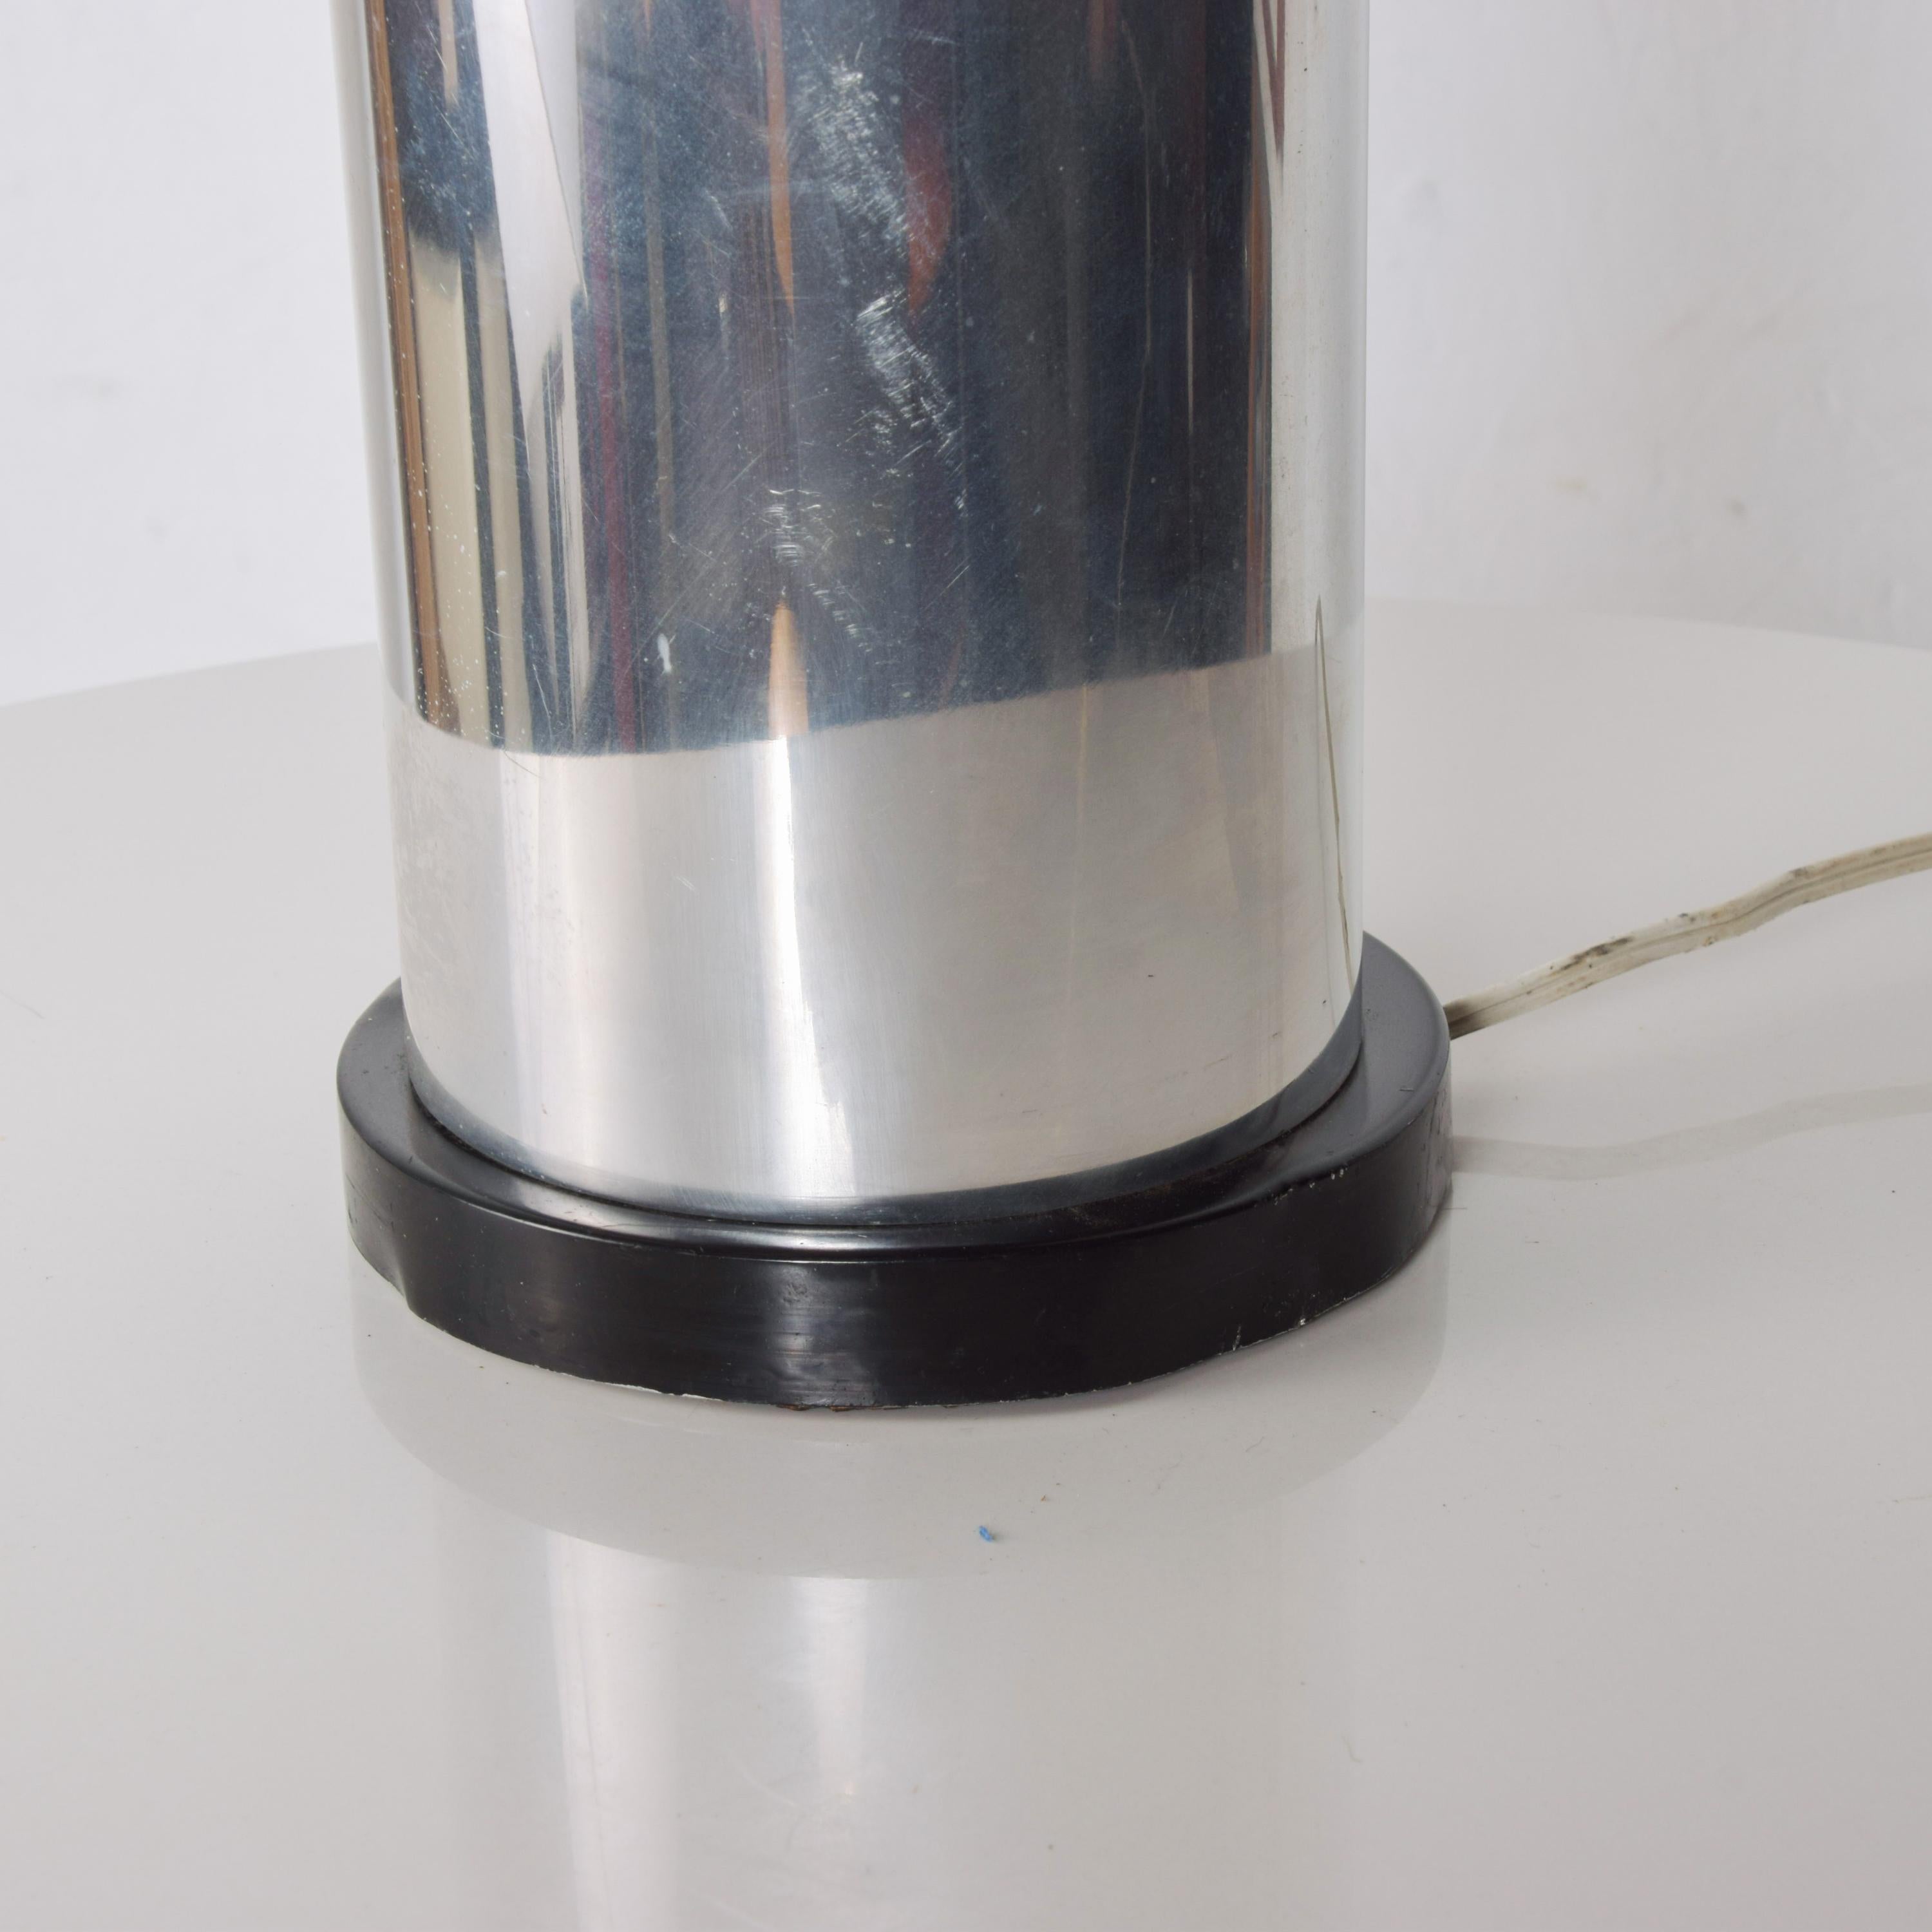 Late 20th Century 1970s Minimalist Chrome Cylinder Table Lamp Silver & Black Style George Kovacs